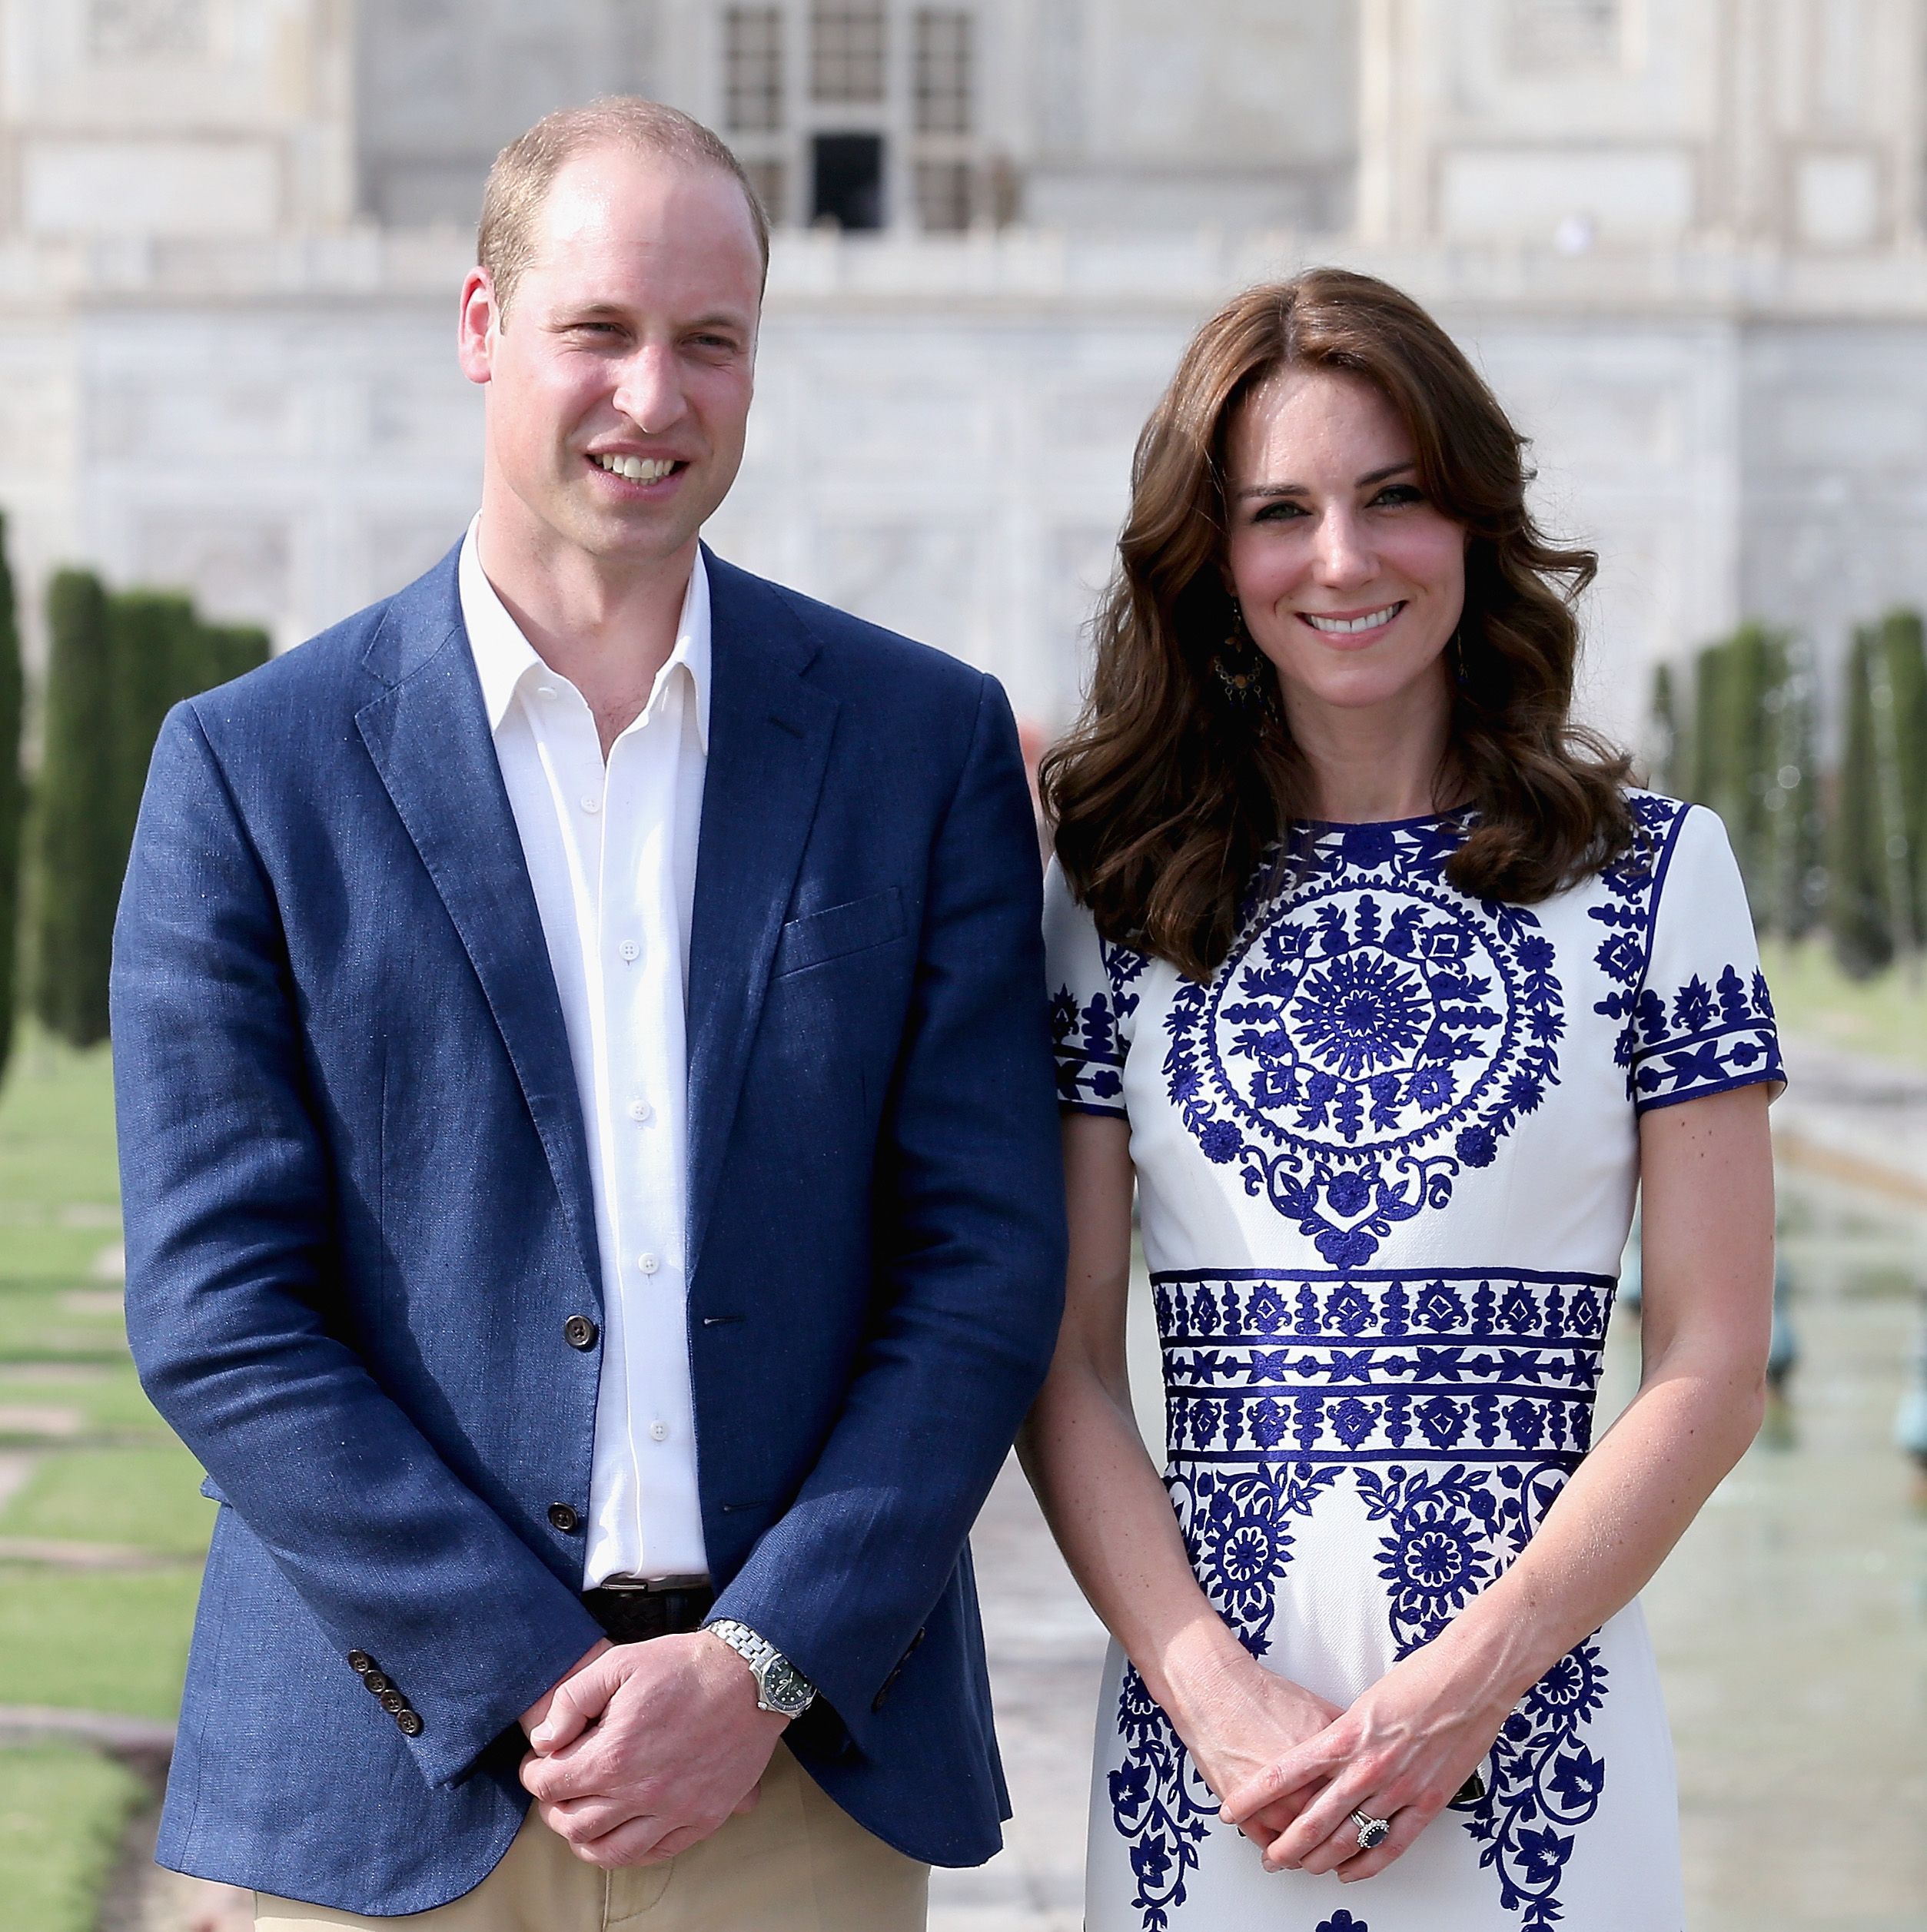 Prince William Has Been Accused of Cheating on Kate Middleton With Their Friend